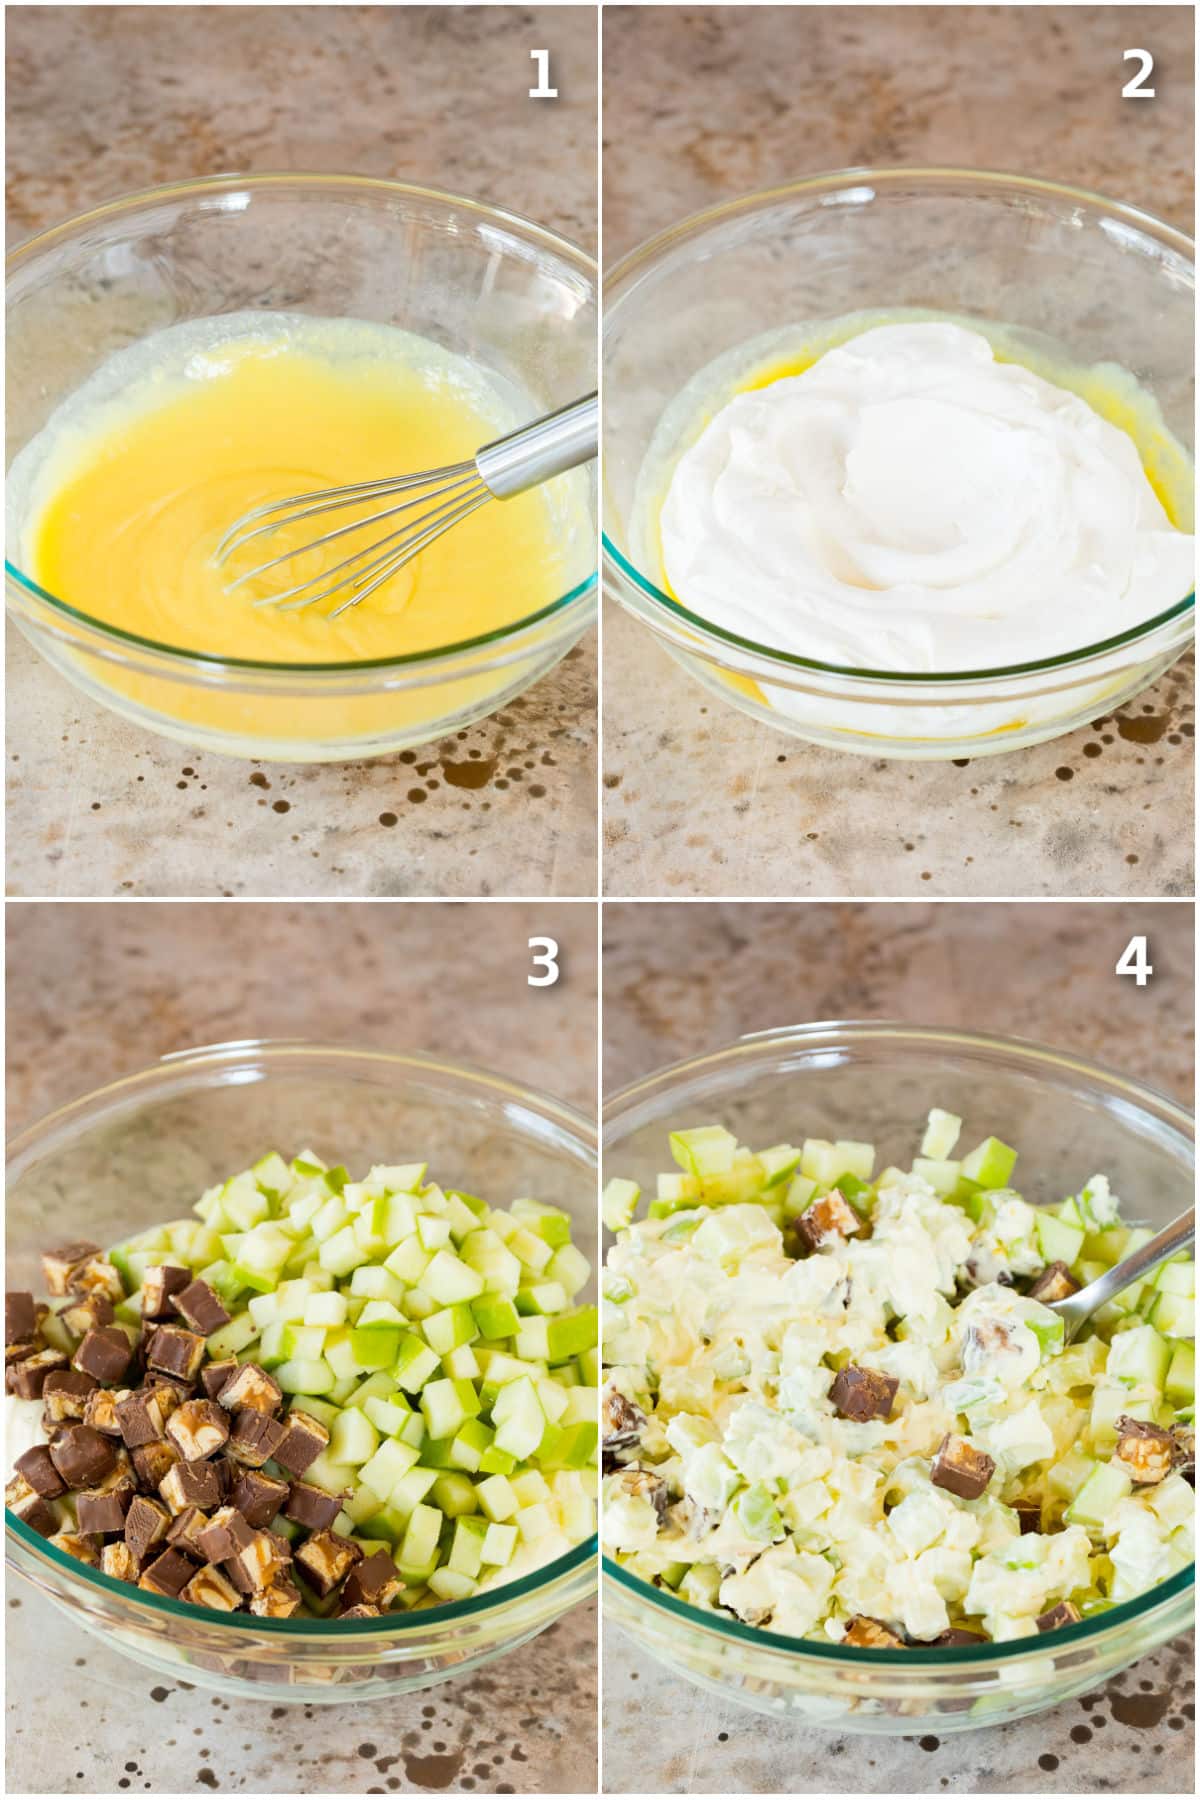 Step by step shots showing how to make snicker apple salad.